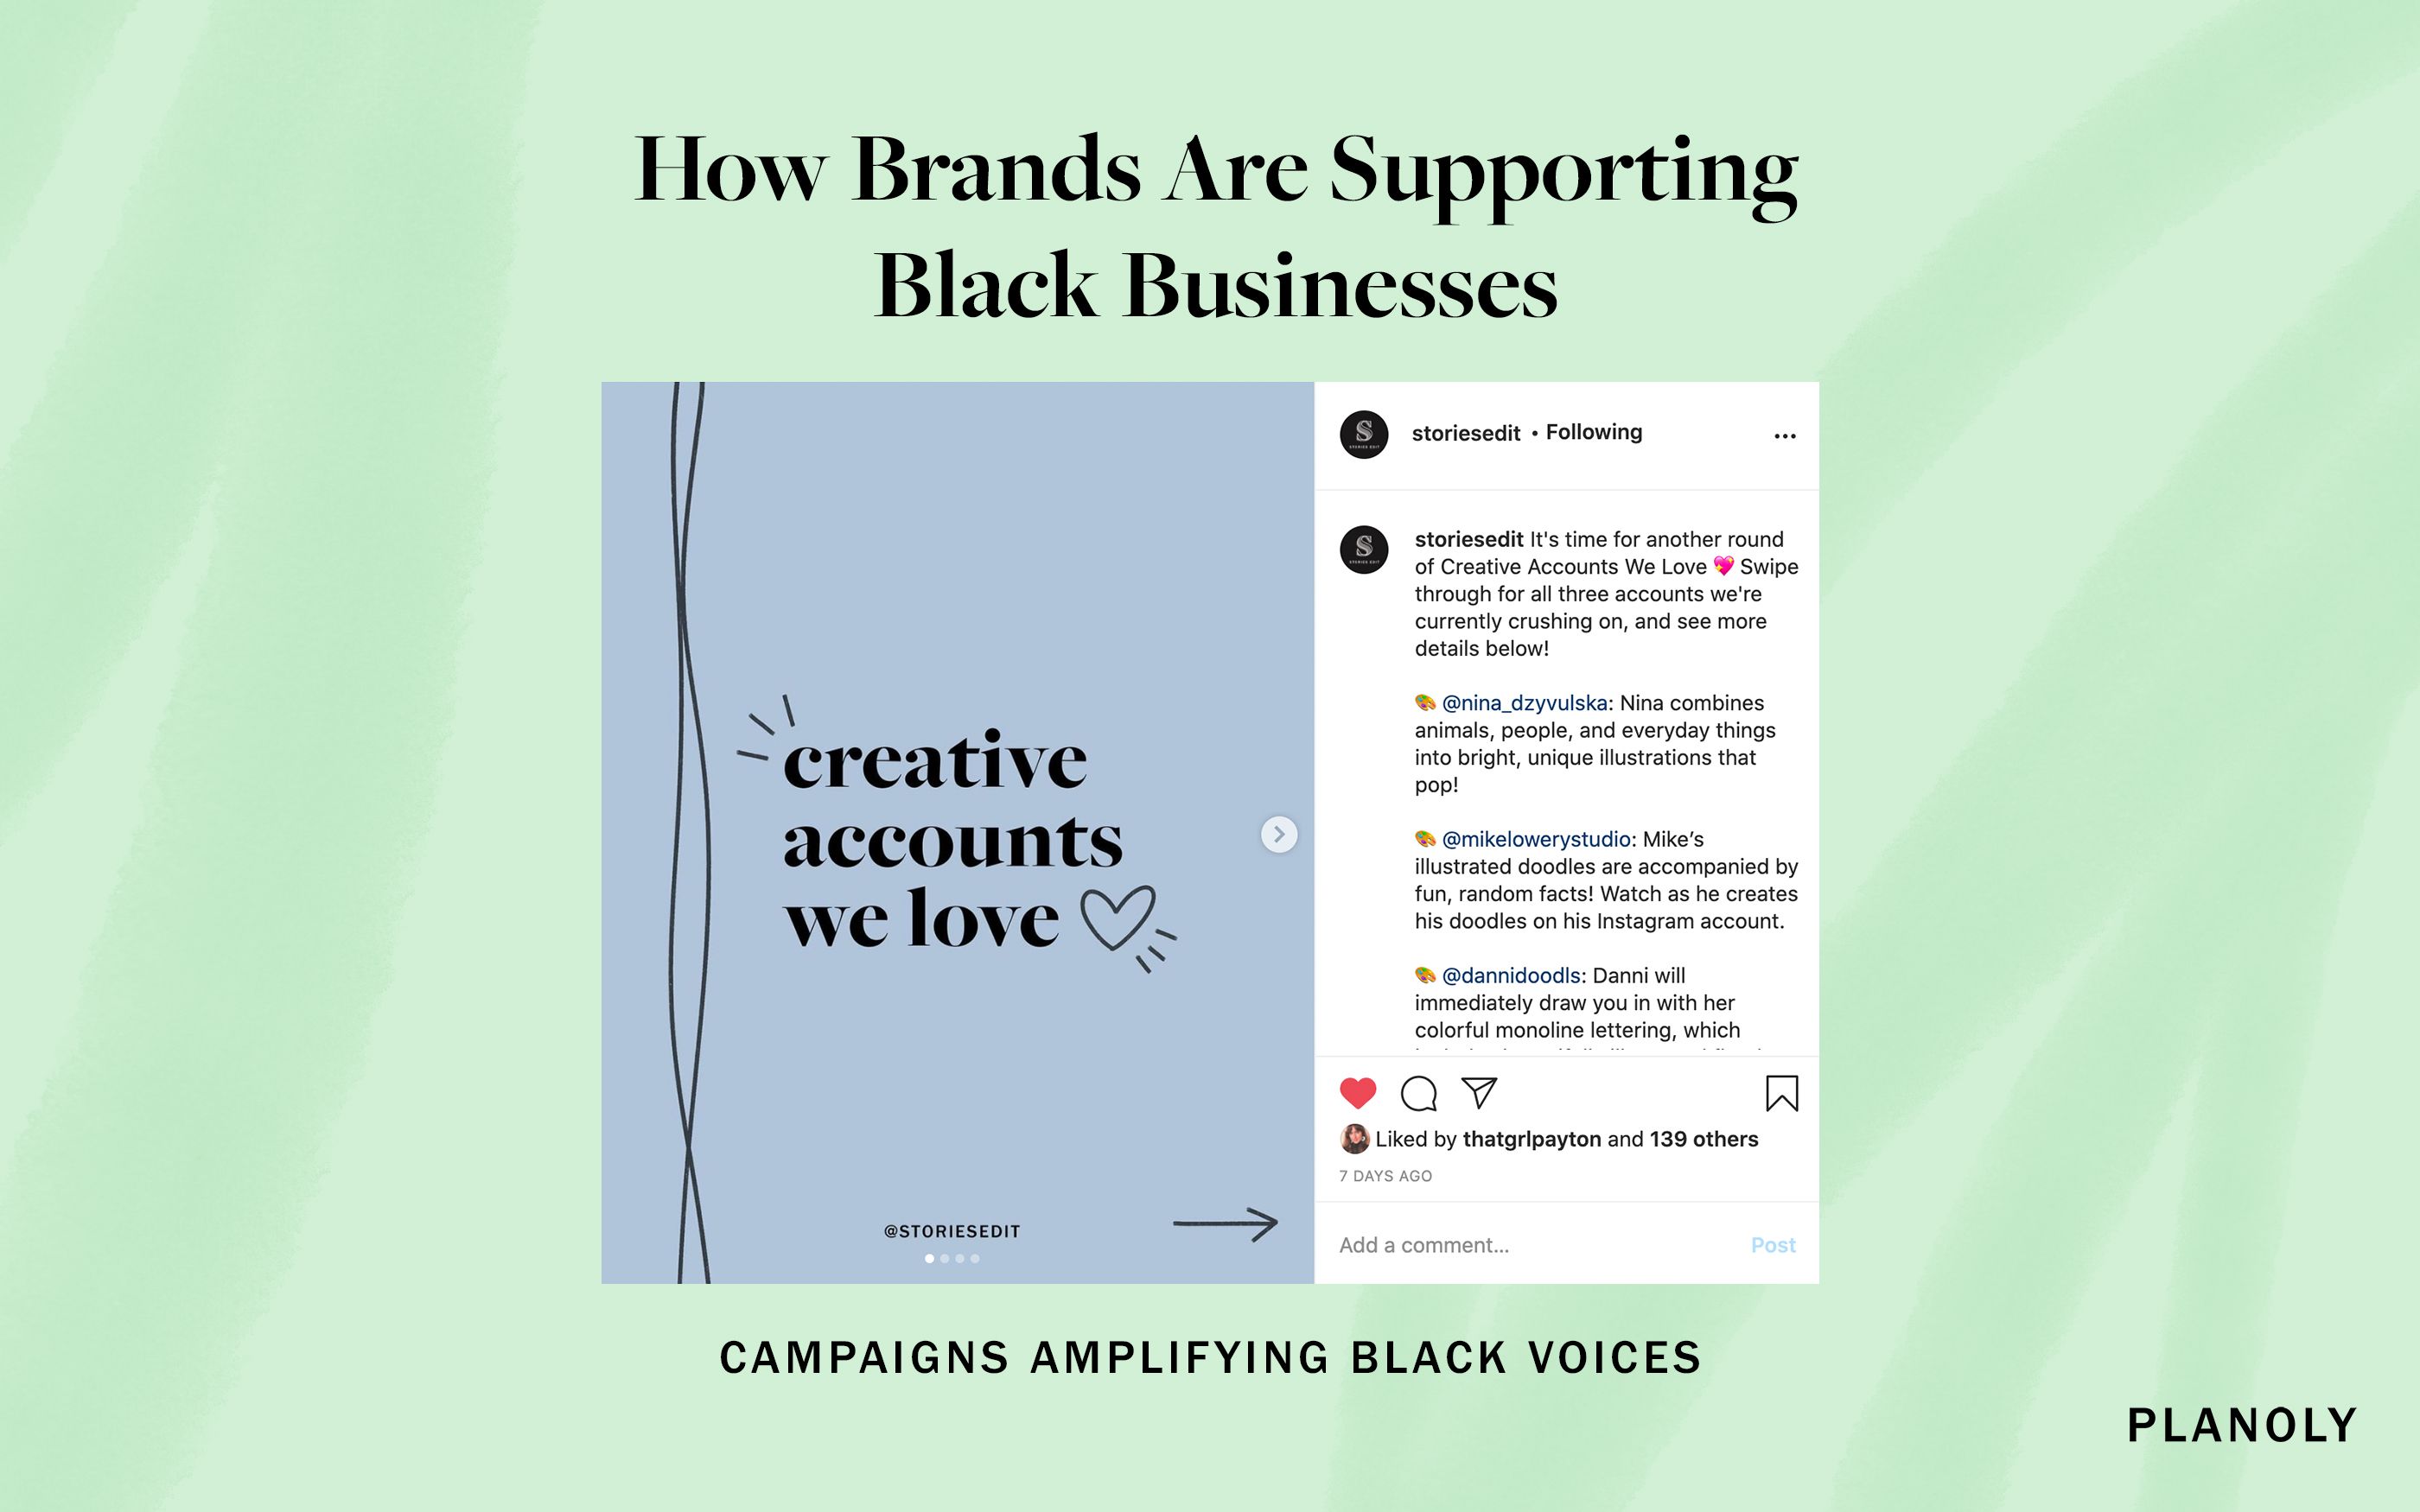 PLANOLY - Blog Post - How to Support Black Businesses - Image 3